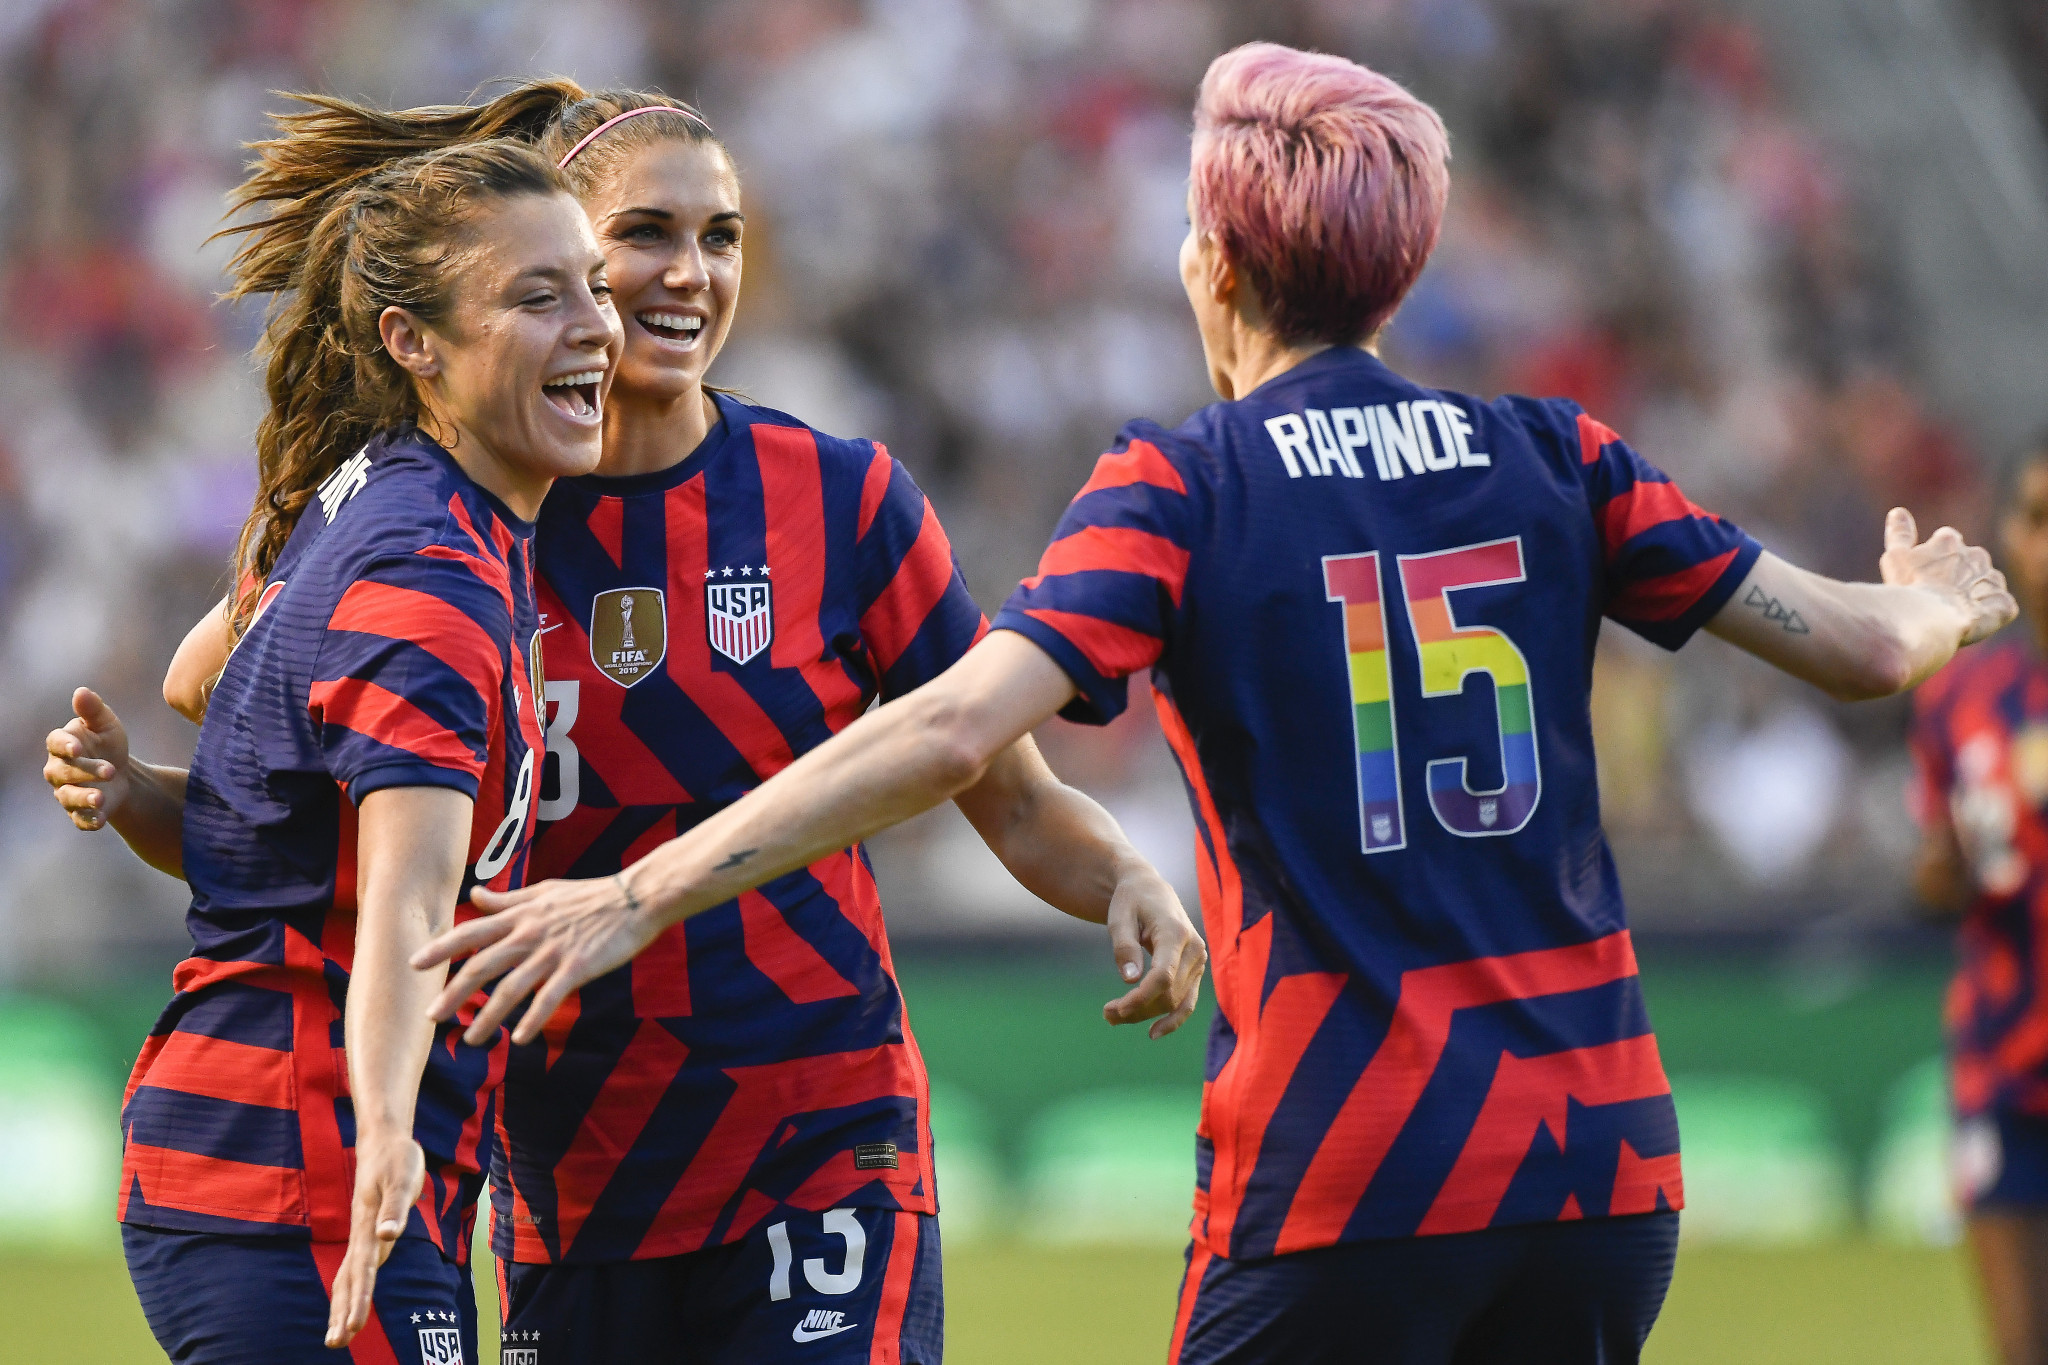 World and defending champions USA to take on Haiti in W Championship opener